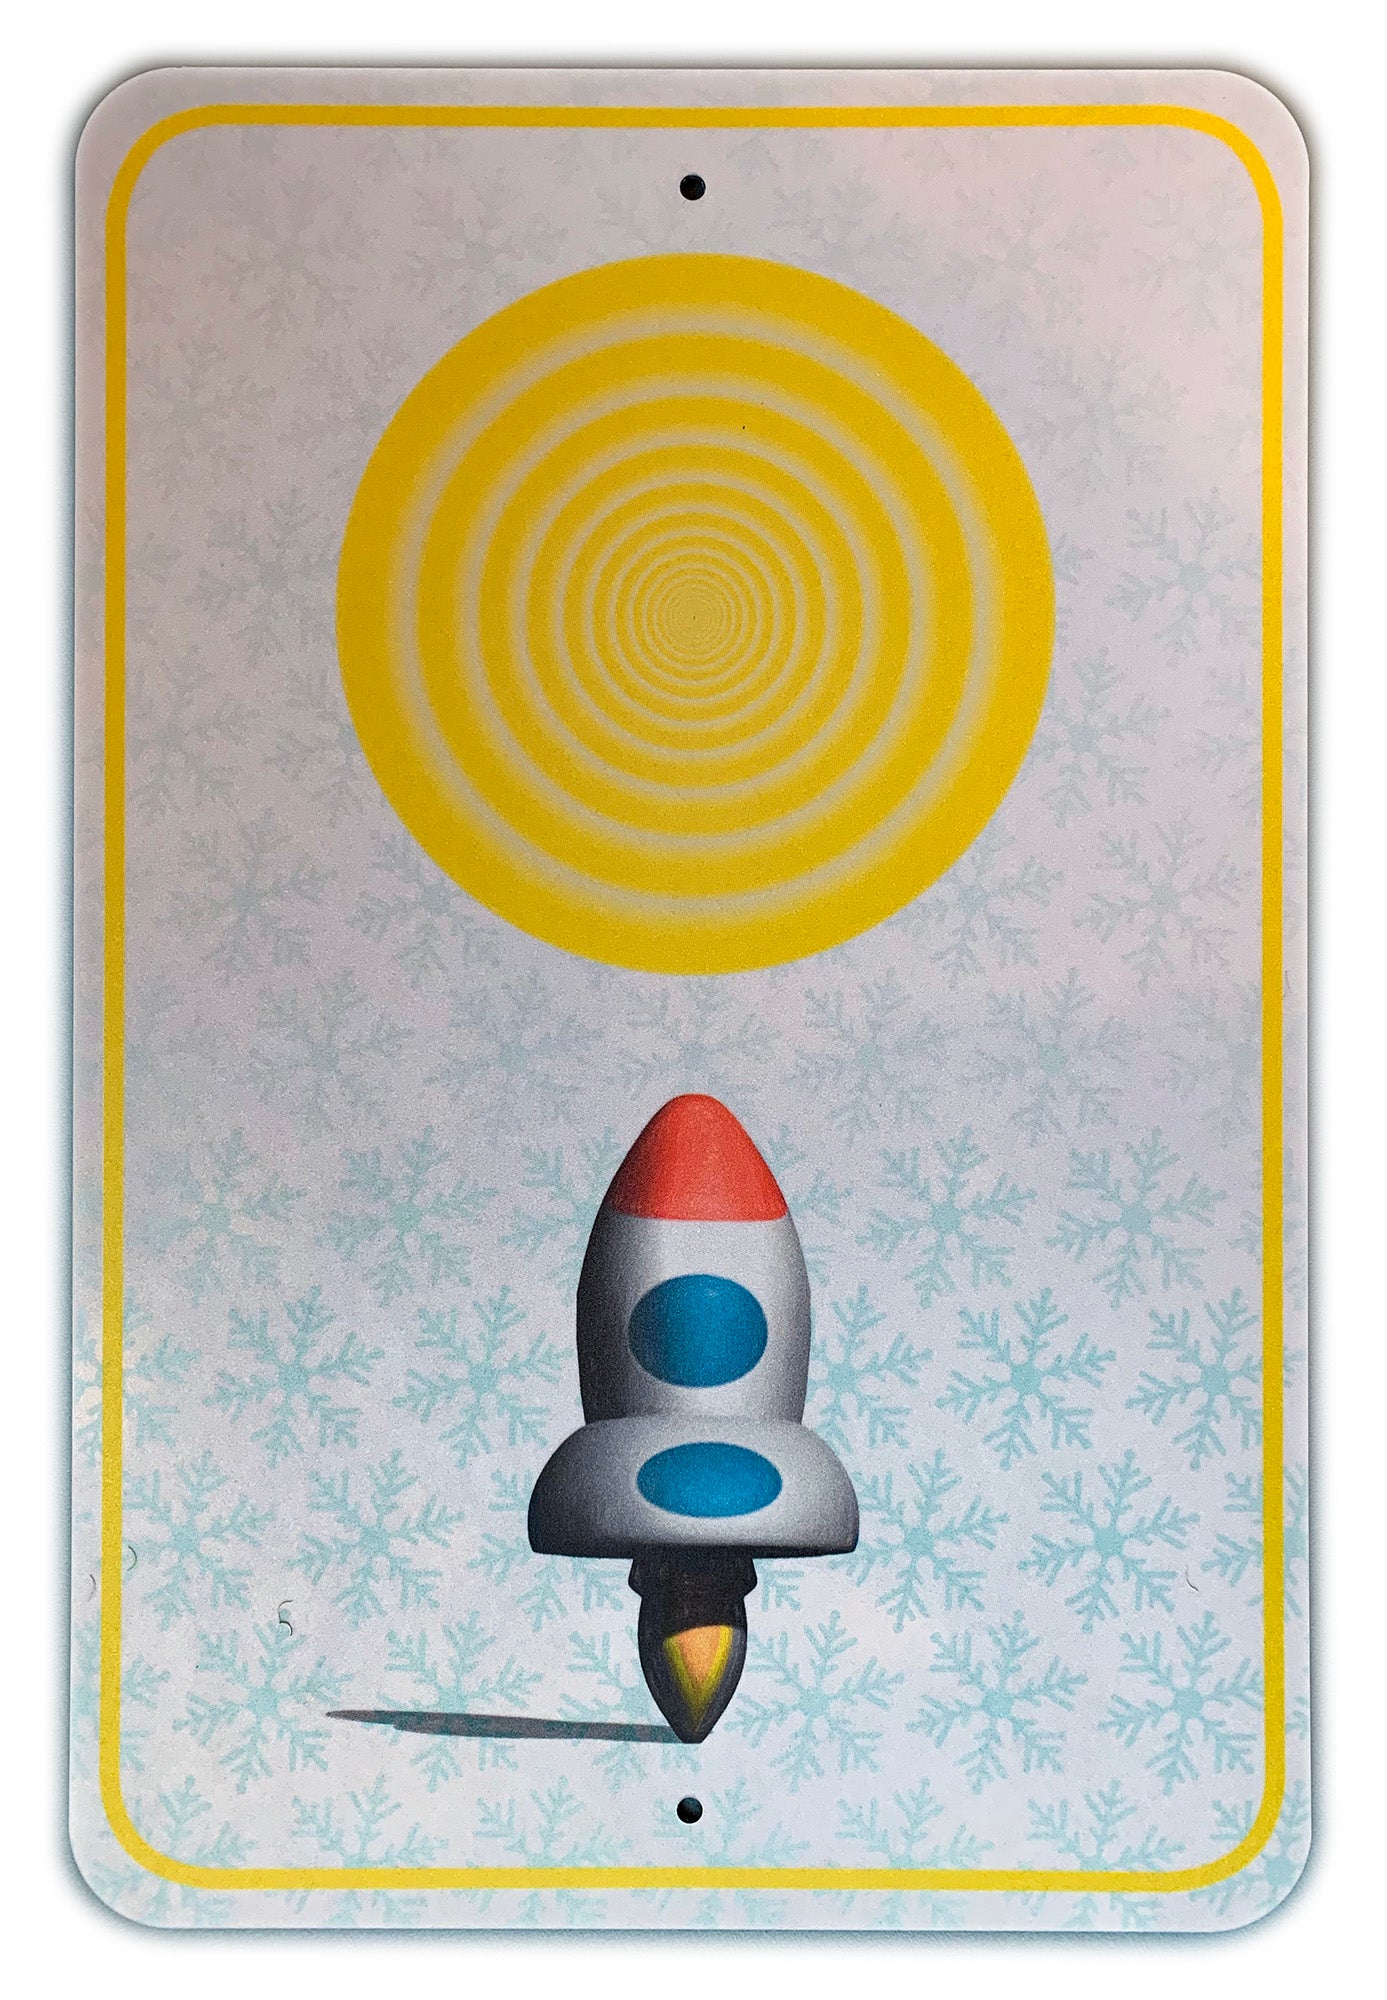 Anne Spalter, "Rocket to the Sun"